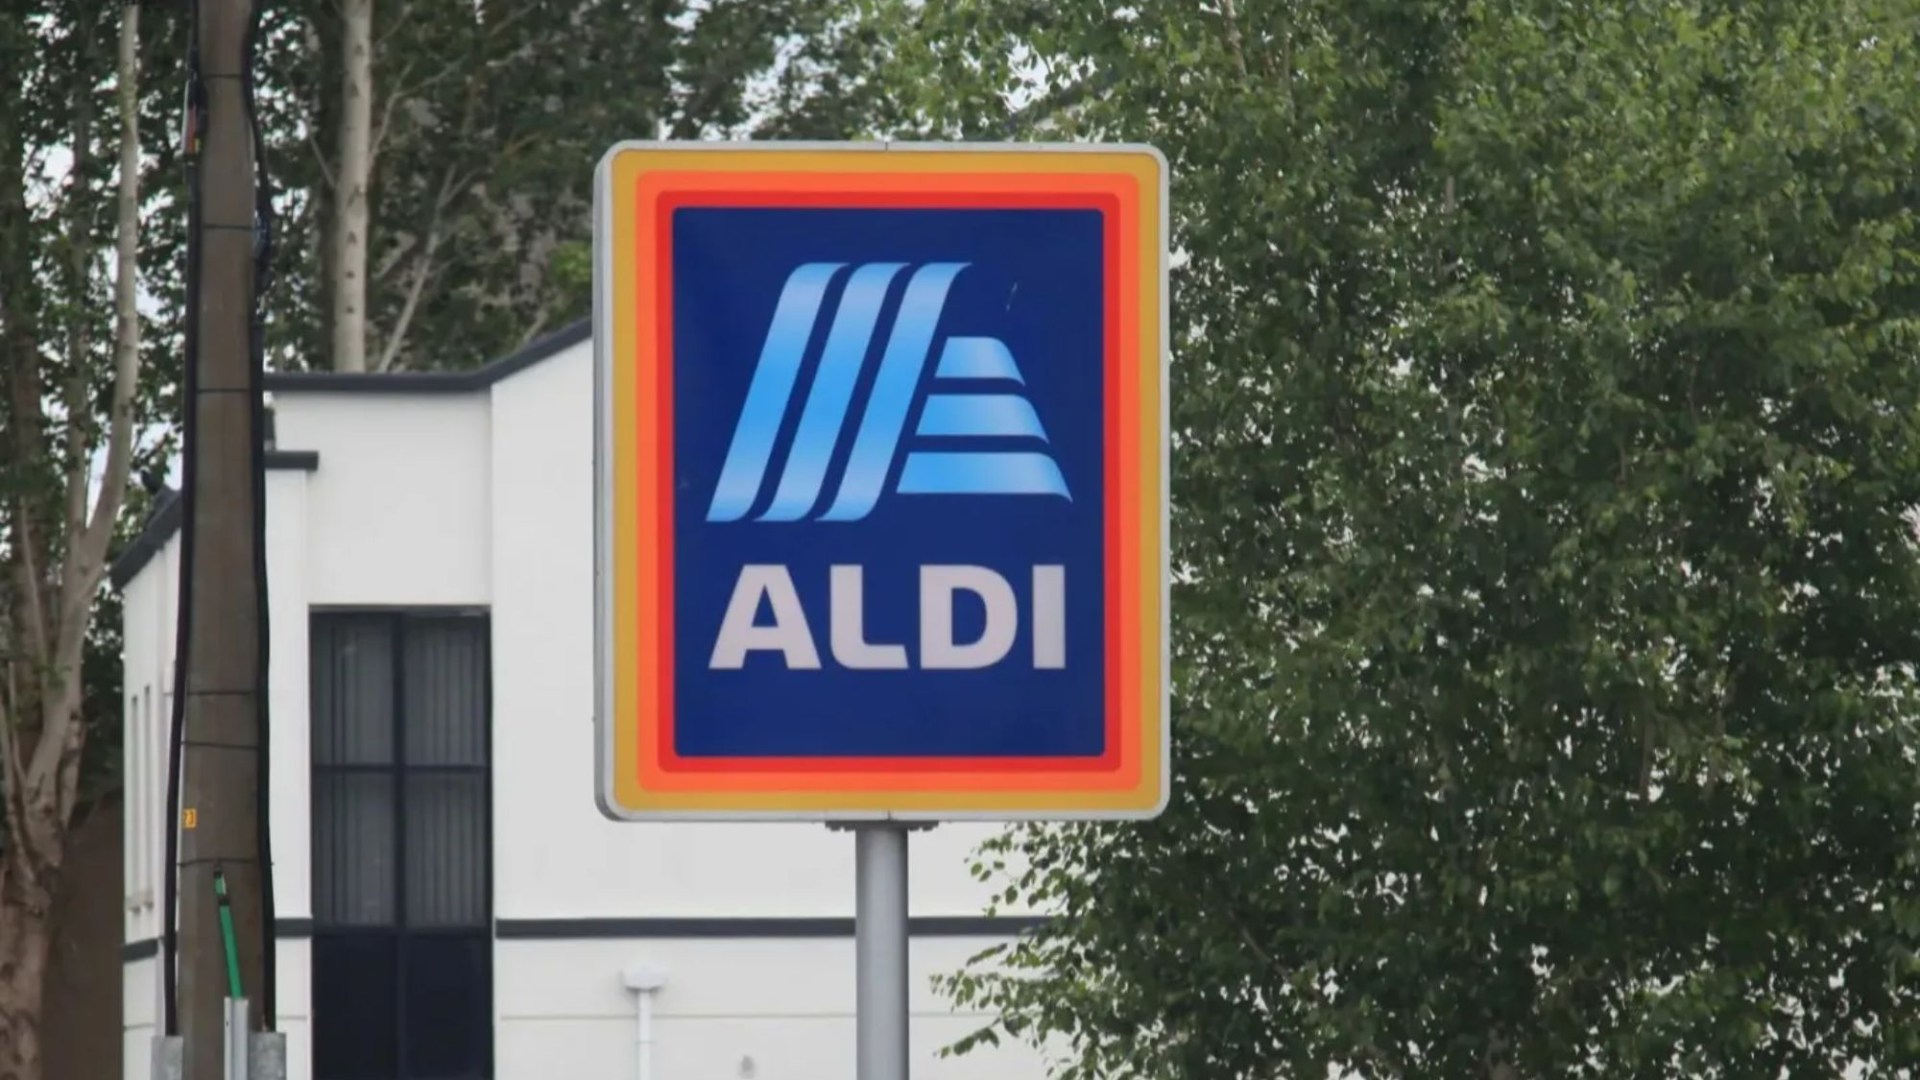 Major warning for thousands of Aldi Ireland customers as store confirms temporary closure & issues apology [Video]